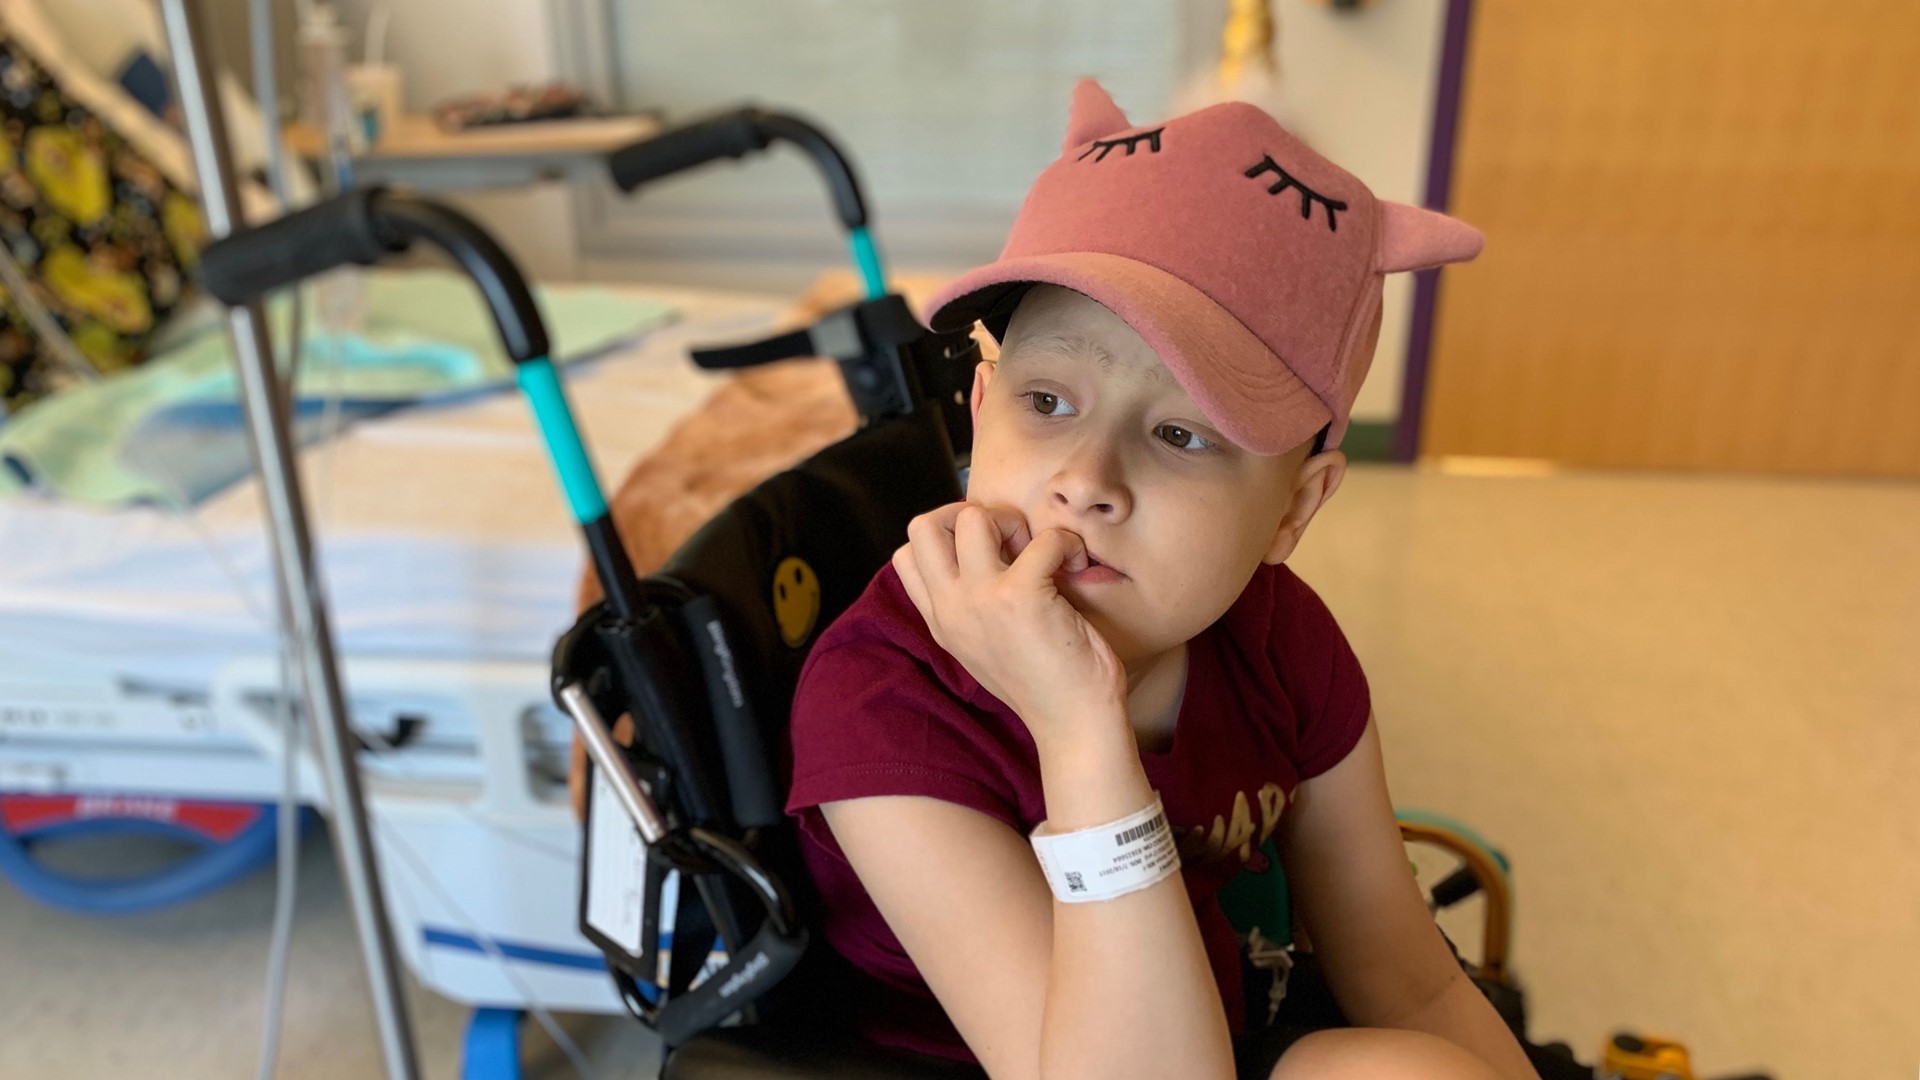 Karsyn Mann is crushing osteosarcoma while at Barbara Bush Children's Hospital. The 7-year-old from Oakland recently had her left foot amputated but she isn't letting that slow her down.